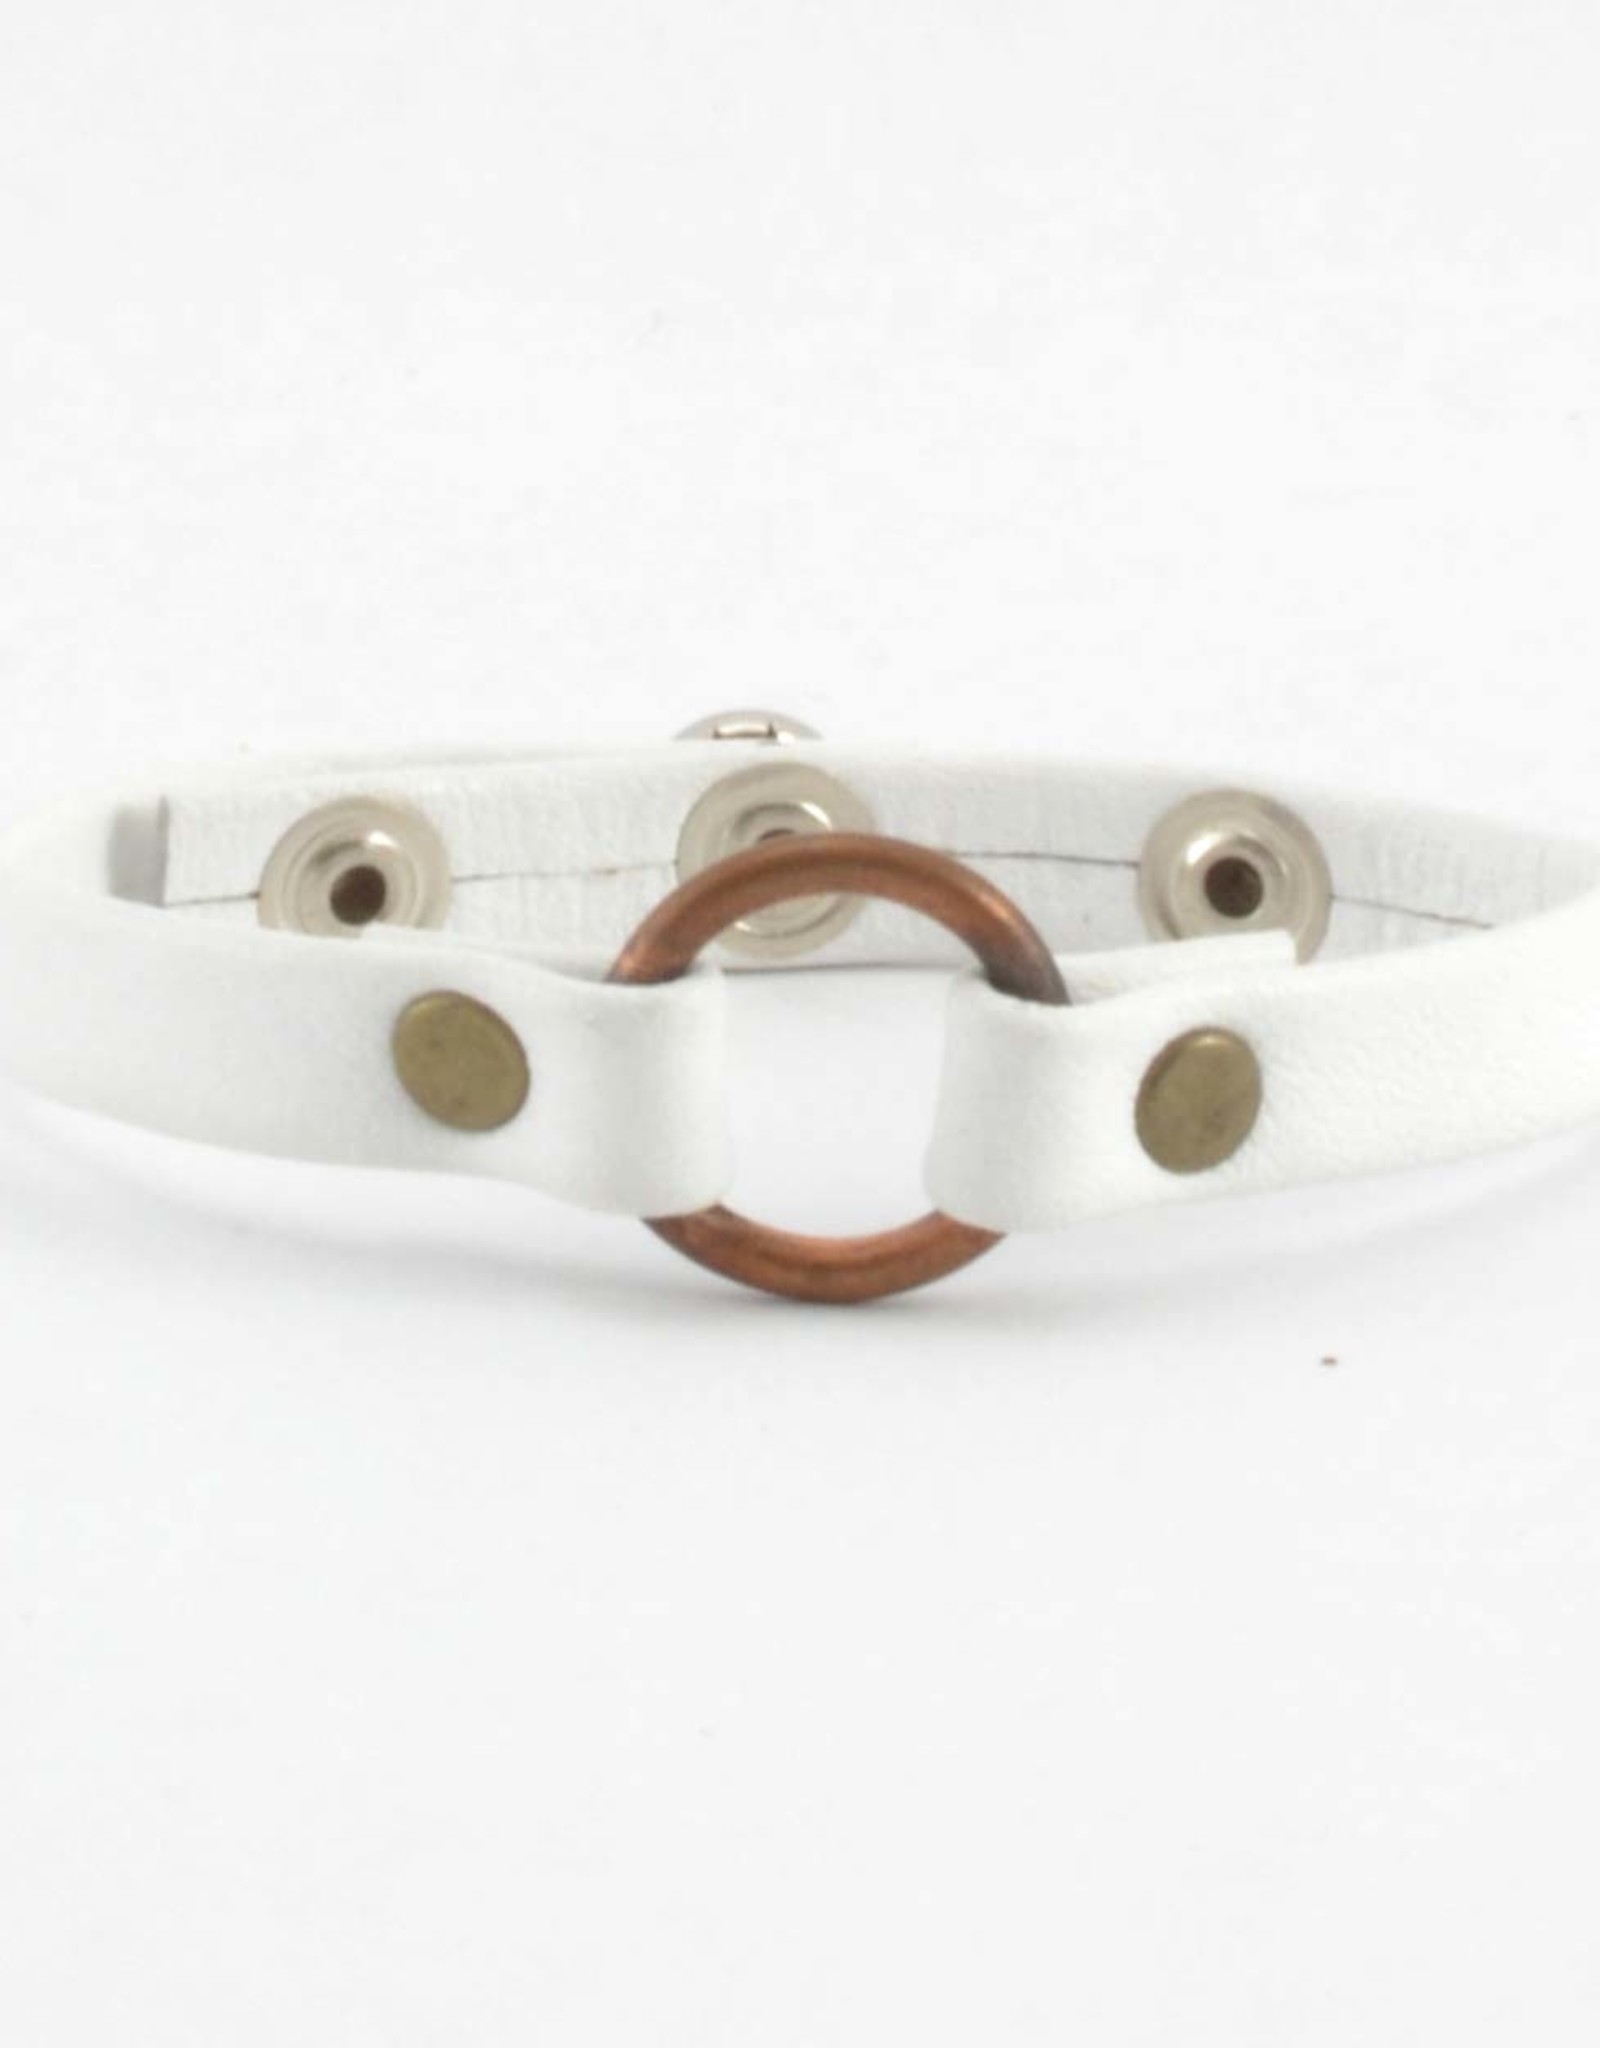 Lucia's Imports Copper Bridle Leather Bracelet - Assorted